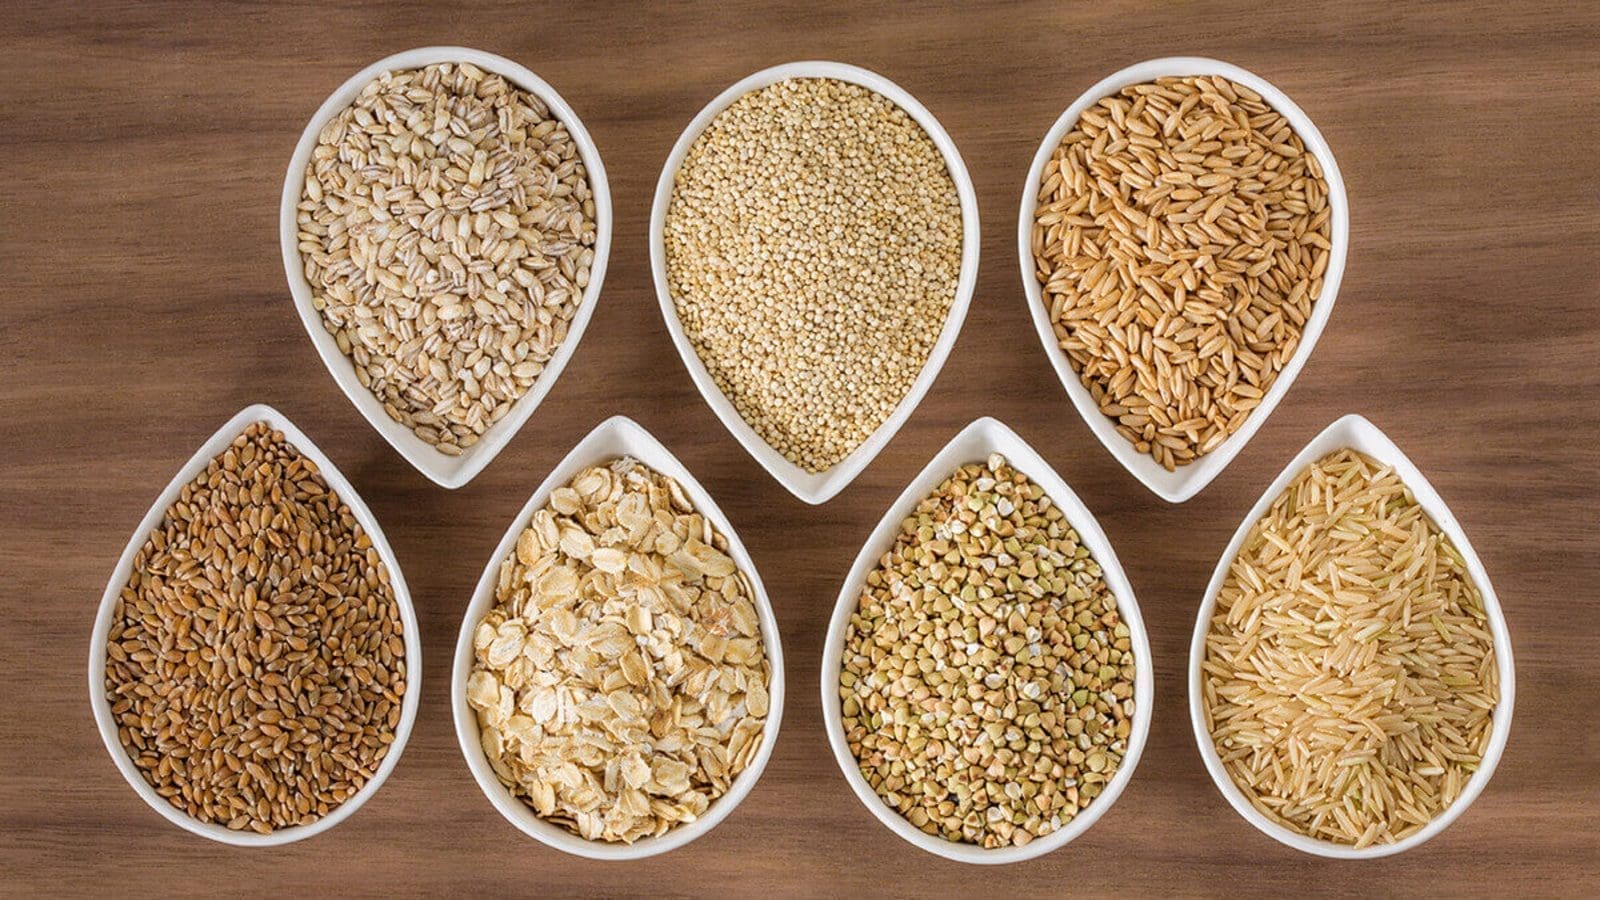 USDA takes steps to enhance transparency and competition in seed industry